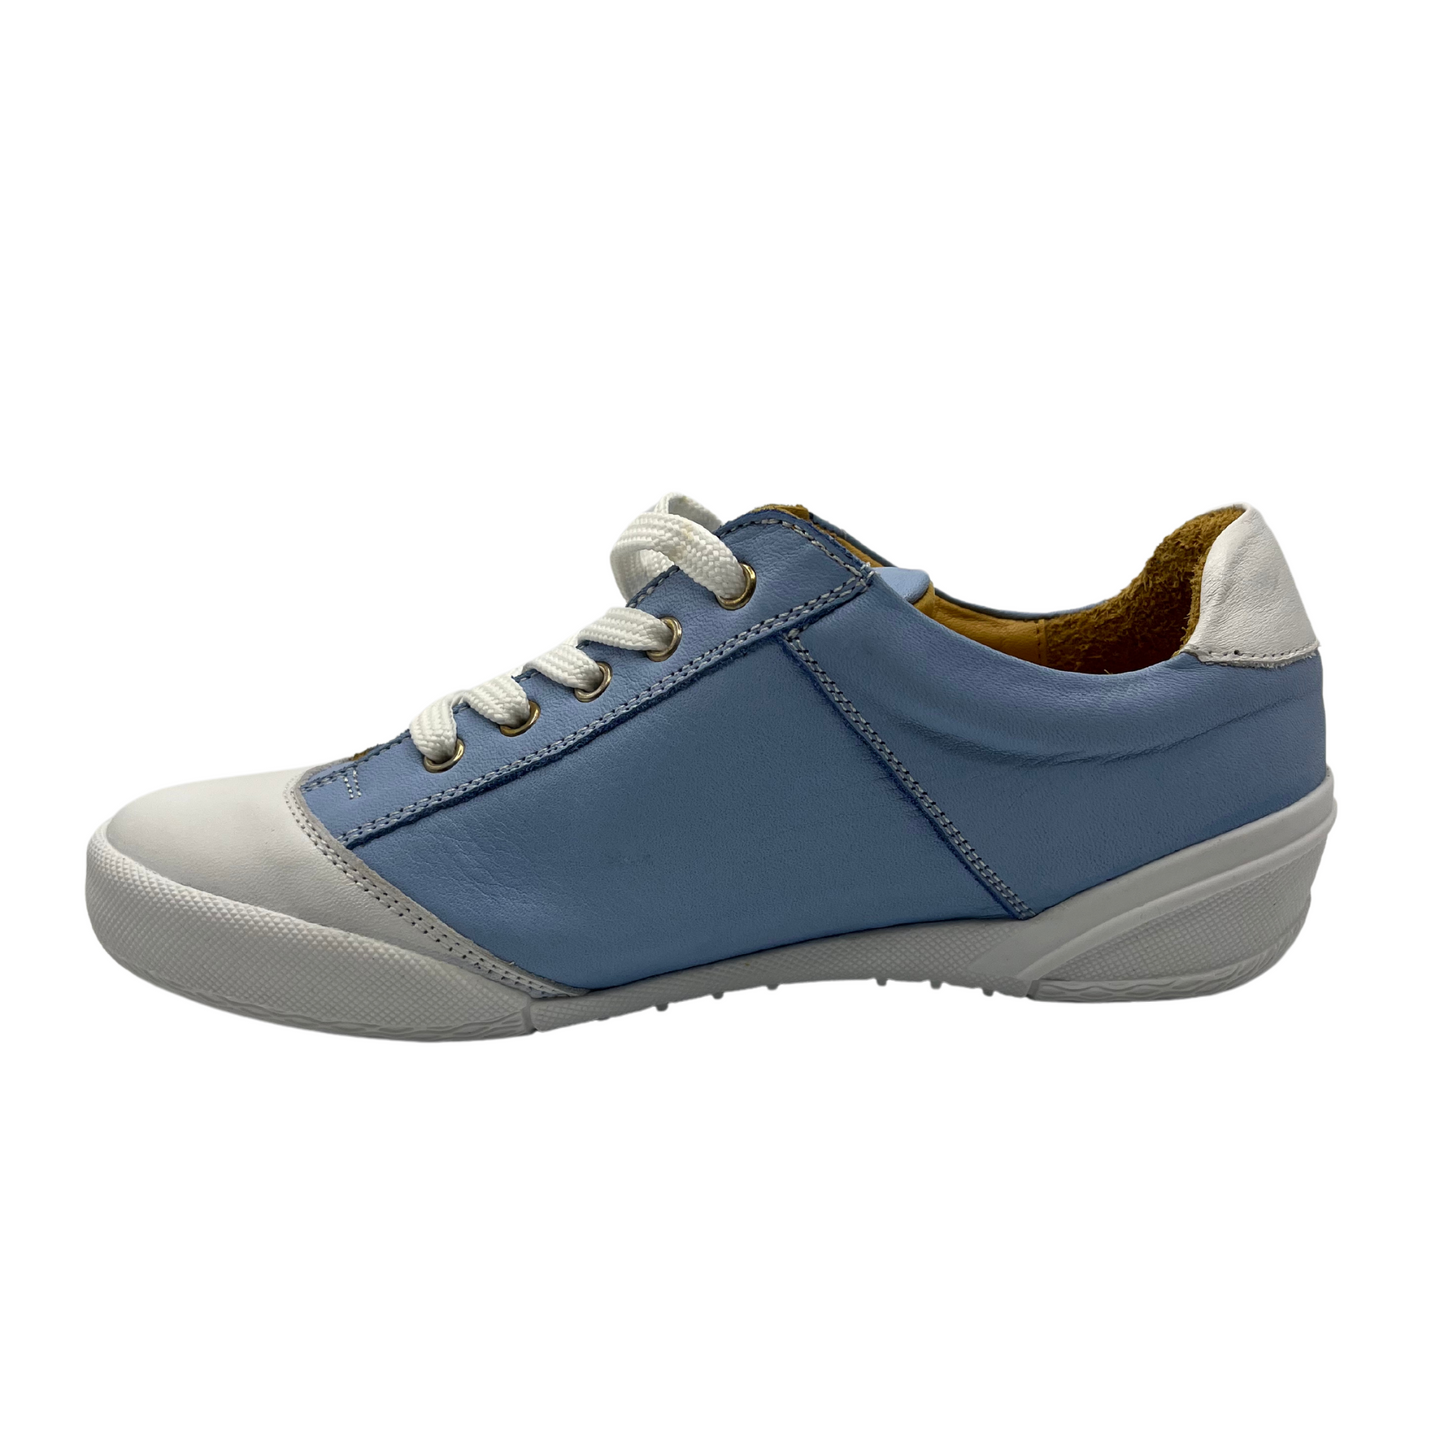 Left facing view of blue and white leather sneaker. It has tan leather lining and side zipper along laces. White rubber outsole and white leather toe cap.